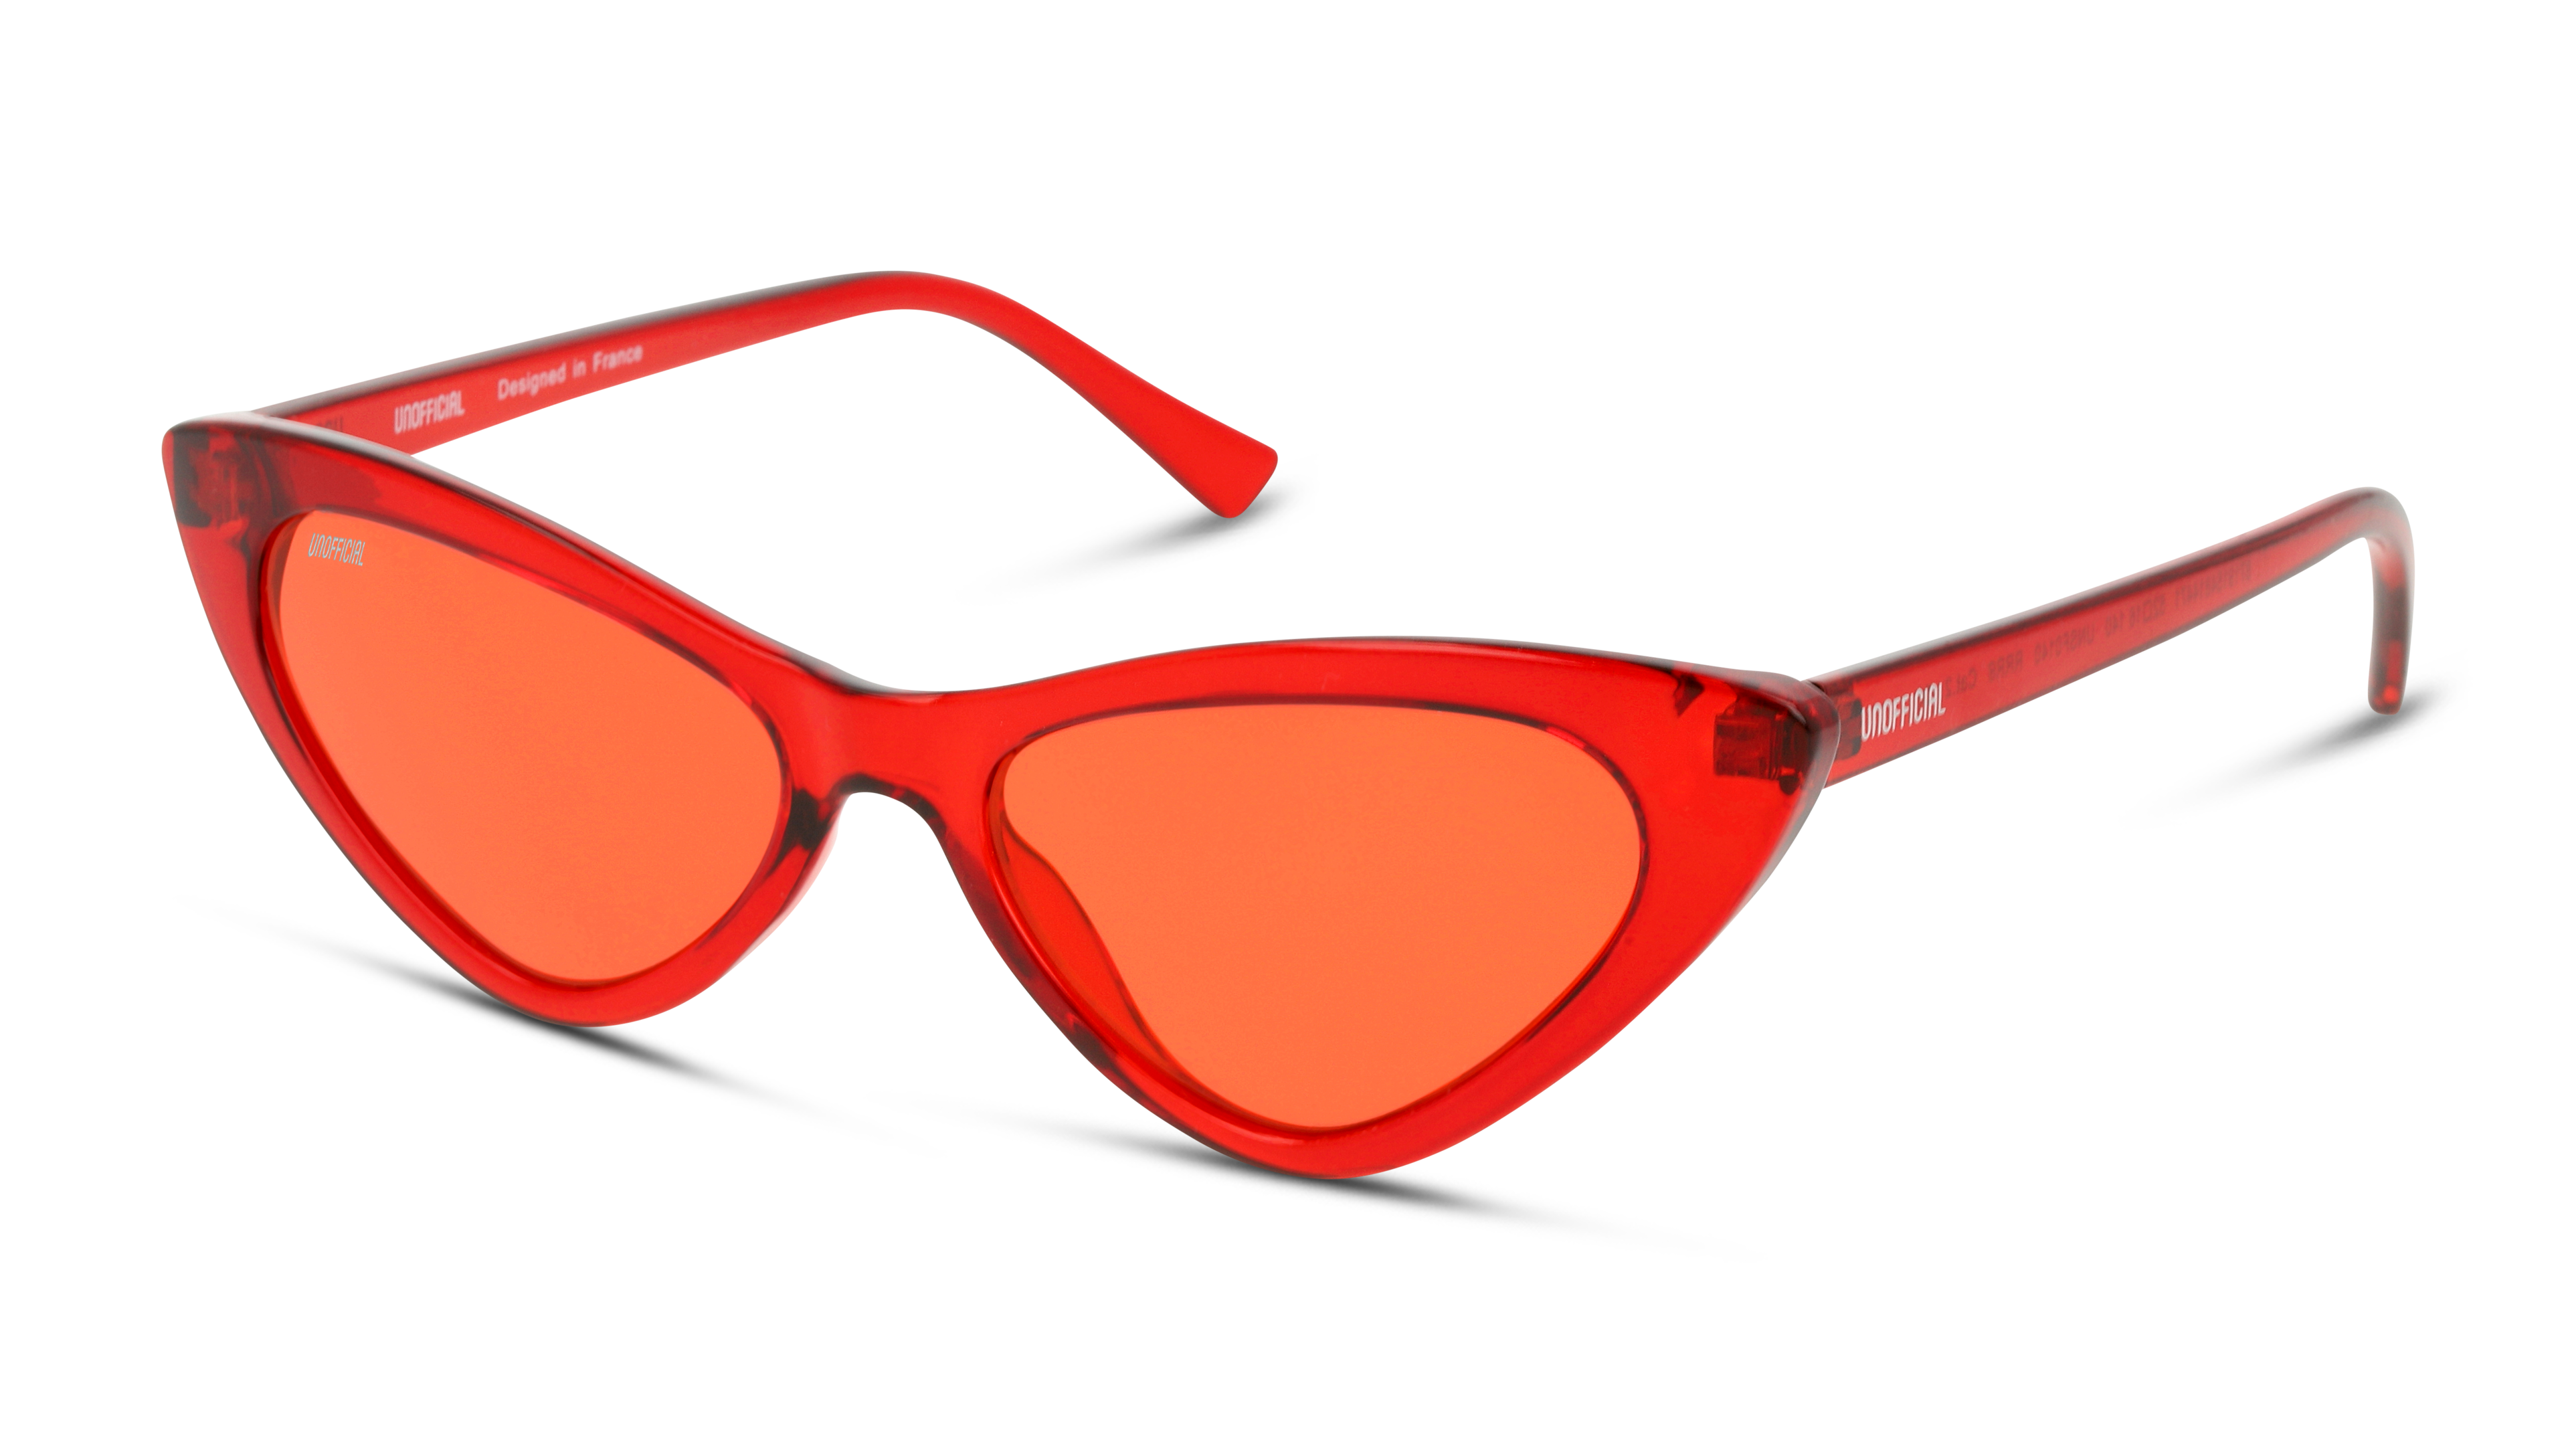 Angle_Left01 Unofficial UNSF0140 Sunglasses Red / Red